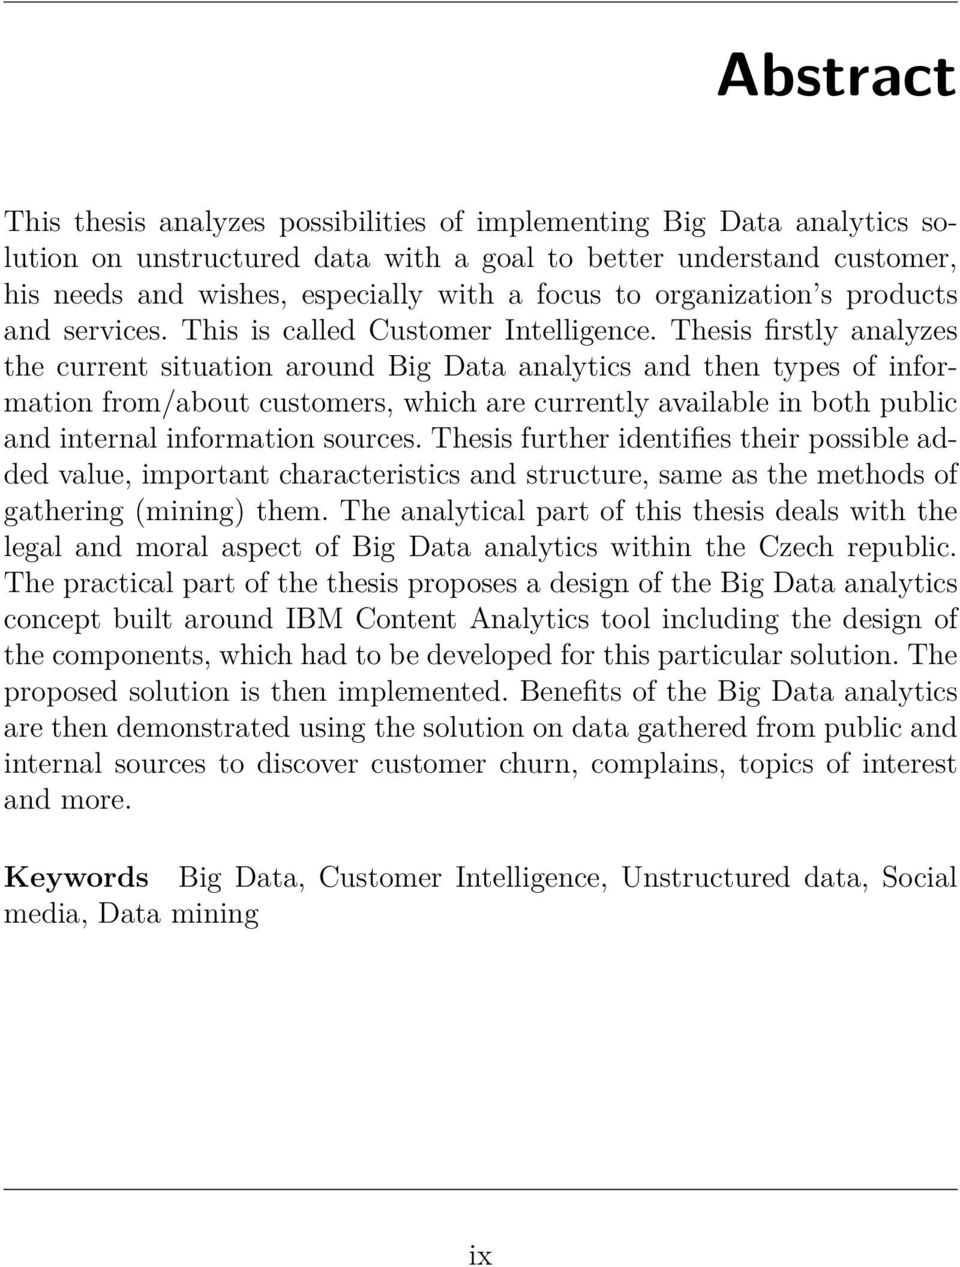 Thesis firstly analyzes the current situation around Big Data analytics and then types of information from/about customers, which are currently available in both public and internal information